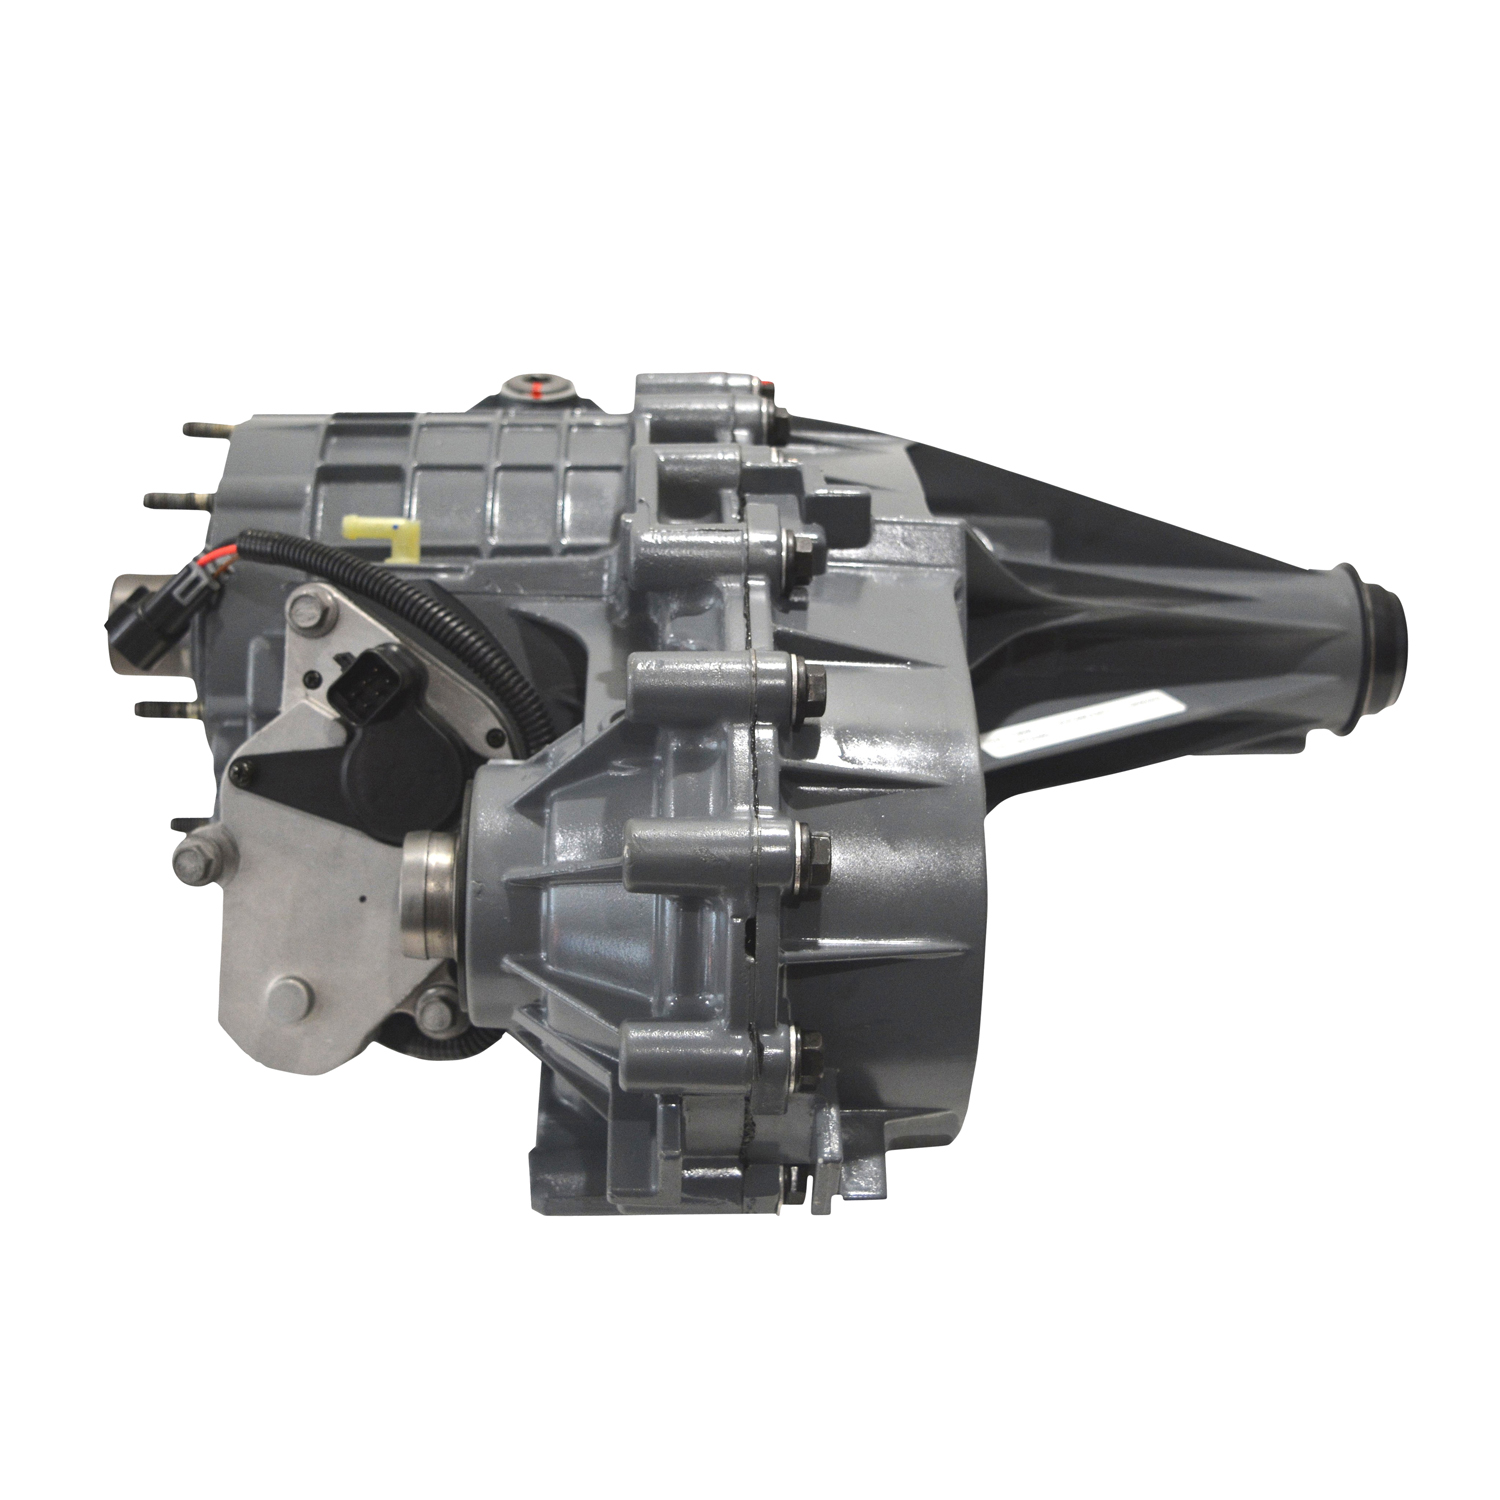 Transfer Case for 2003-2007 General Motors with 4L60 and 4L70E